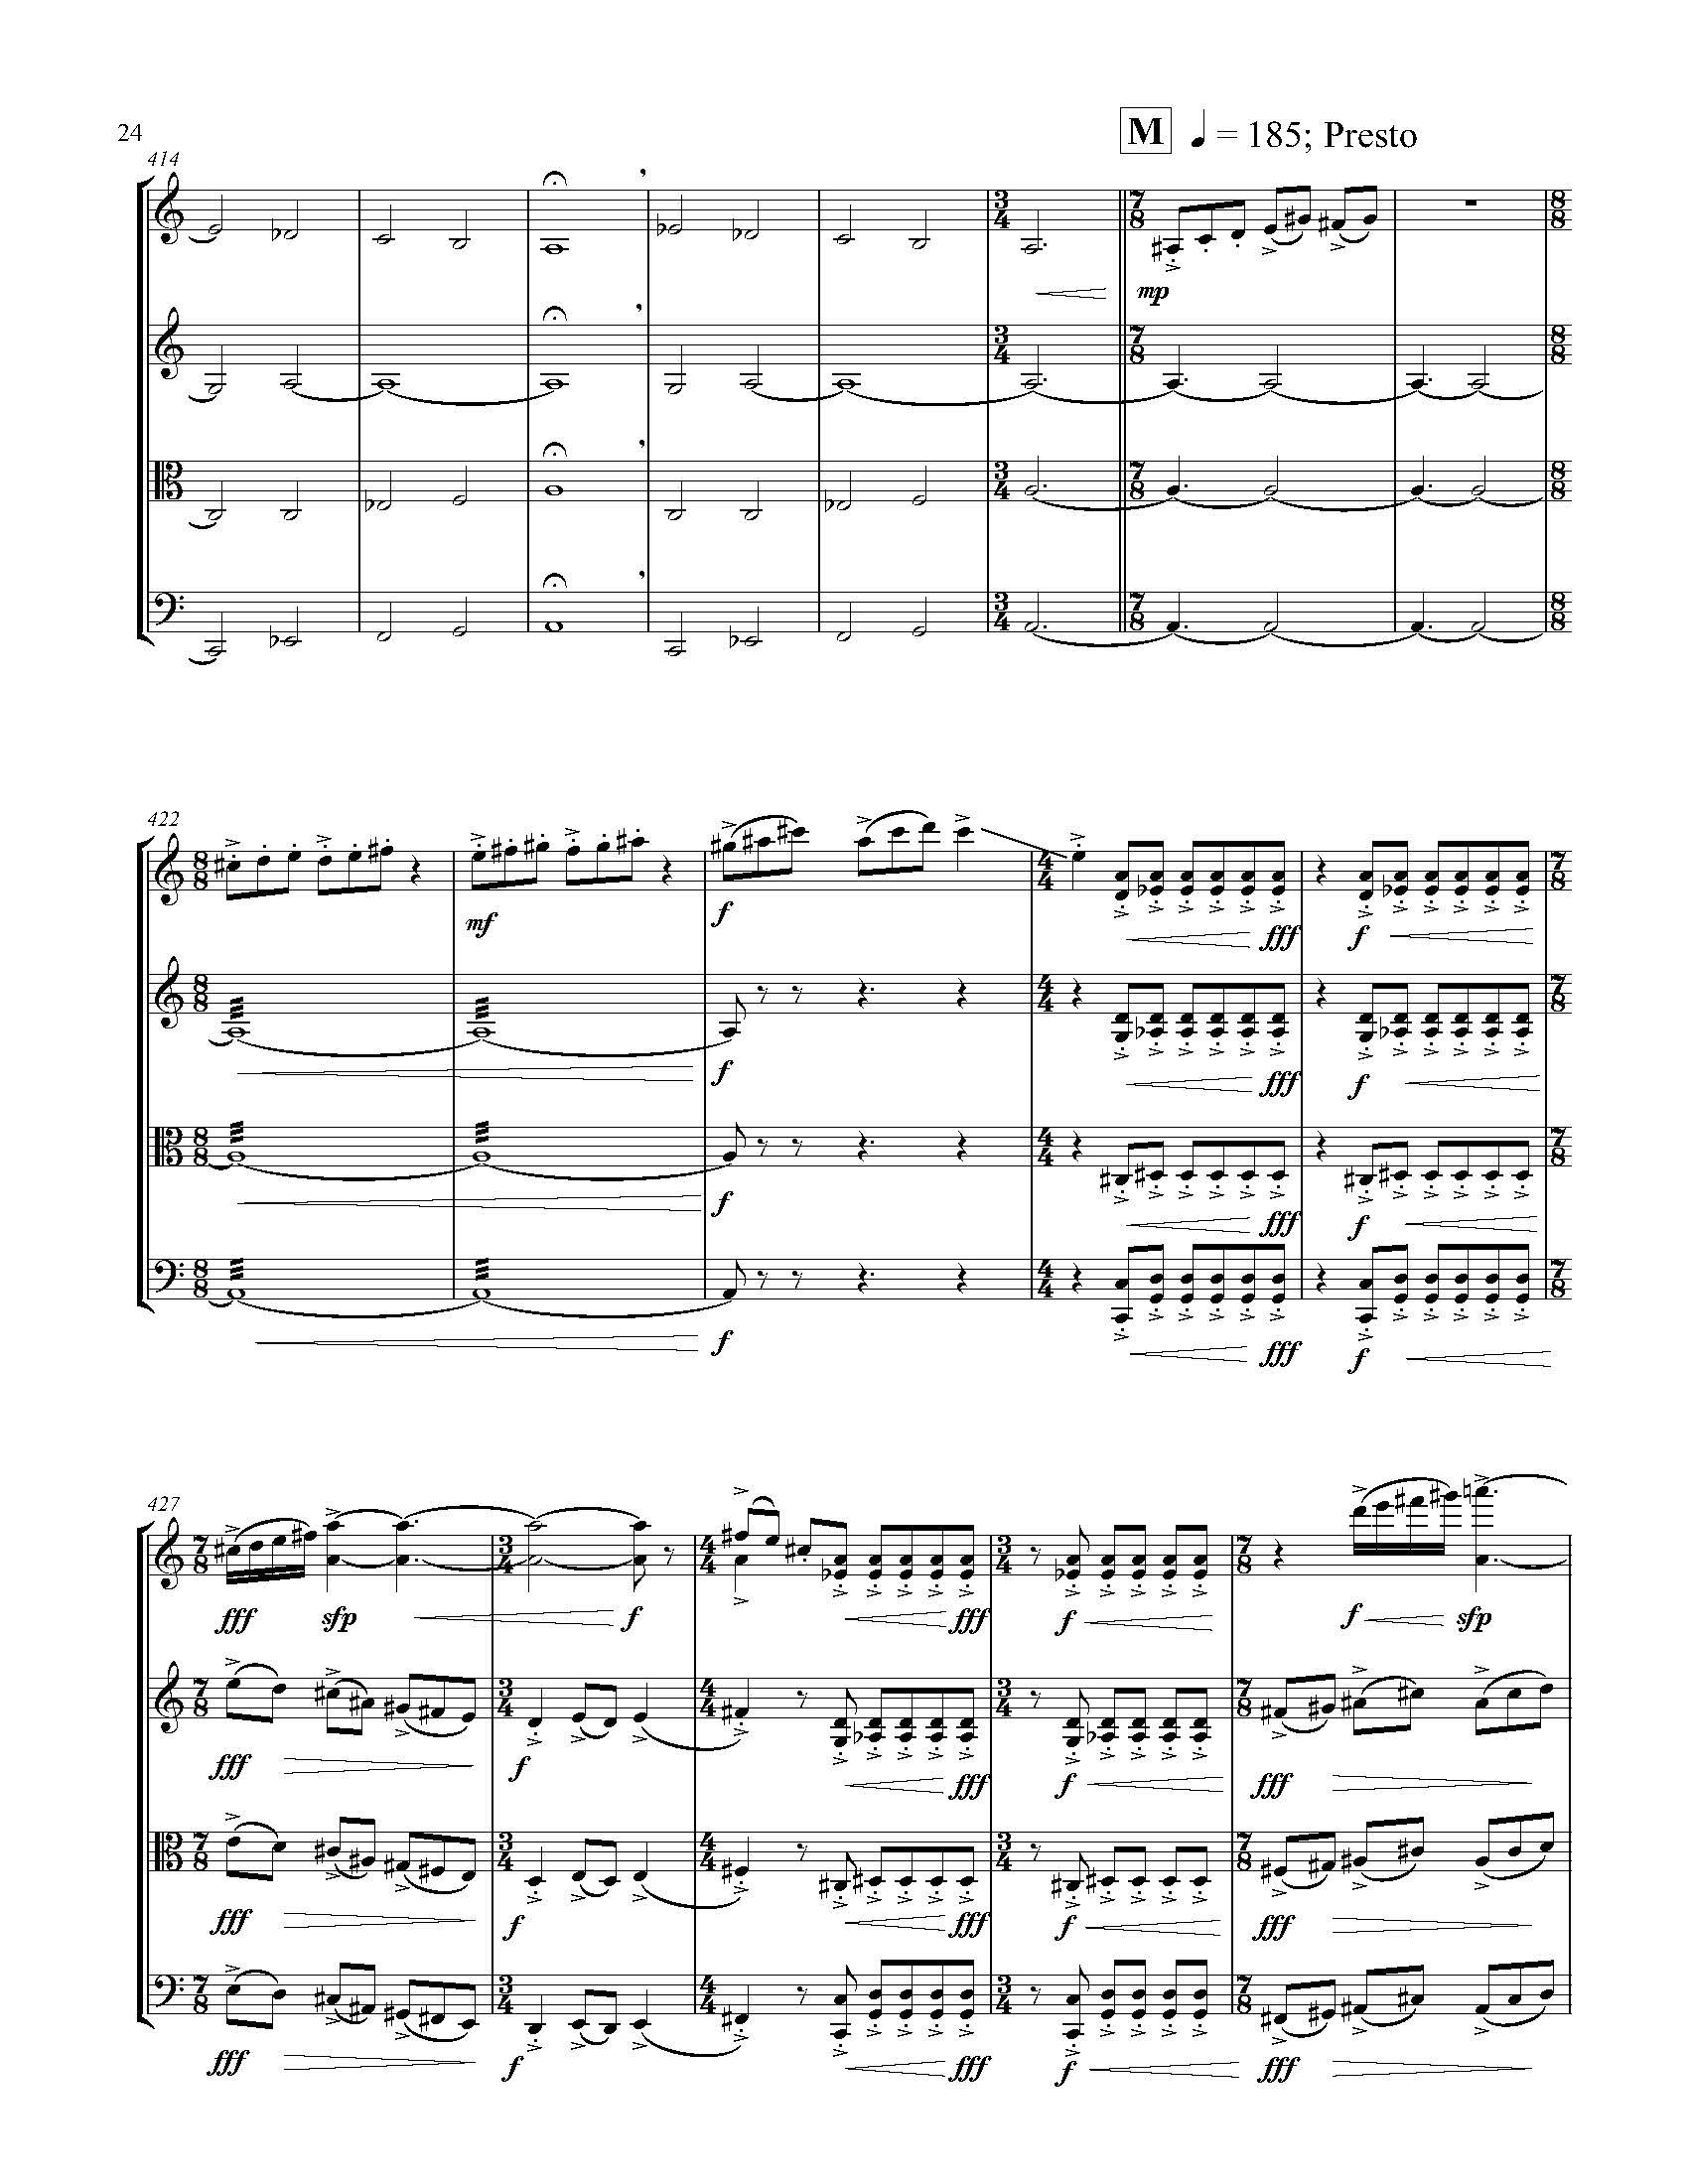 A Country of Vast Designs - Complete Score_Page_30.jpg